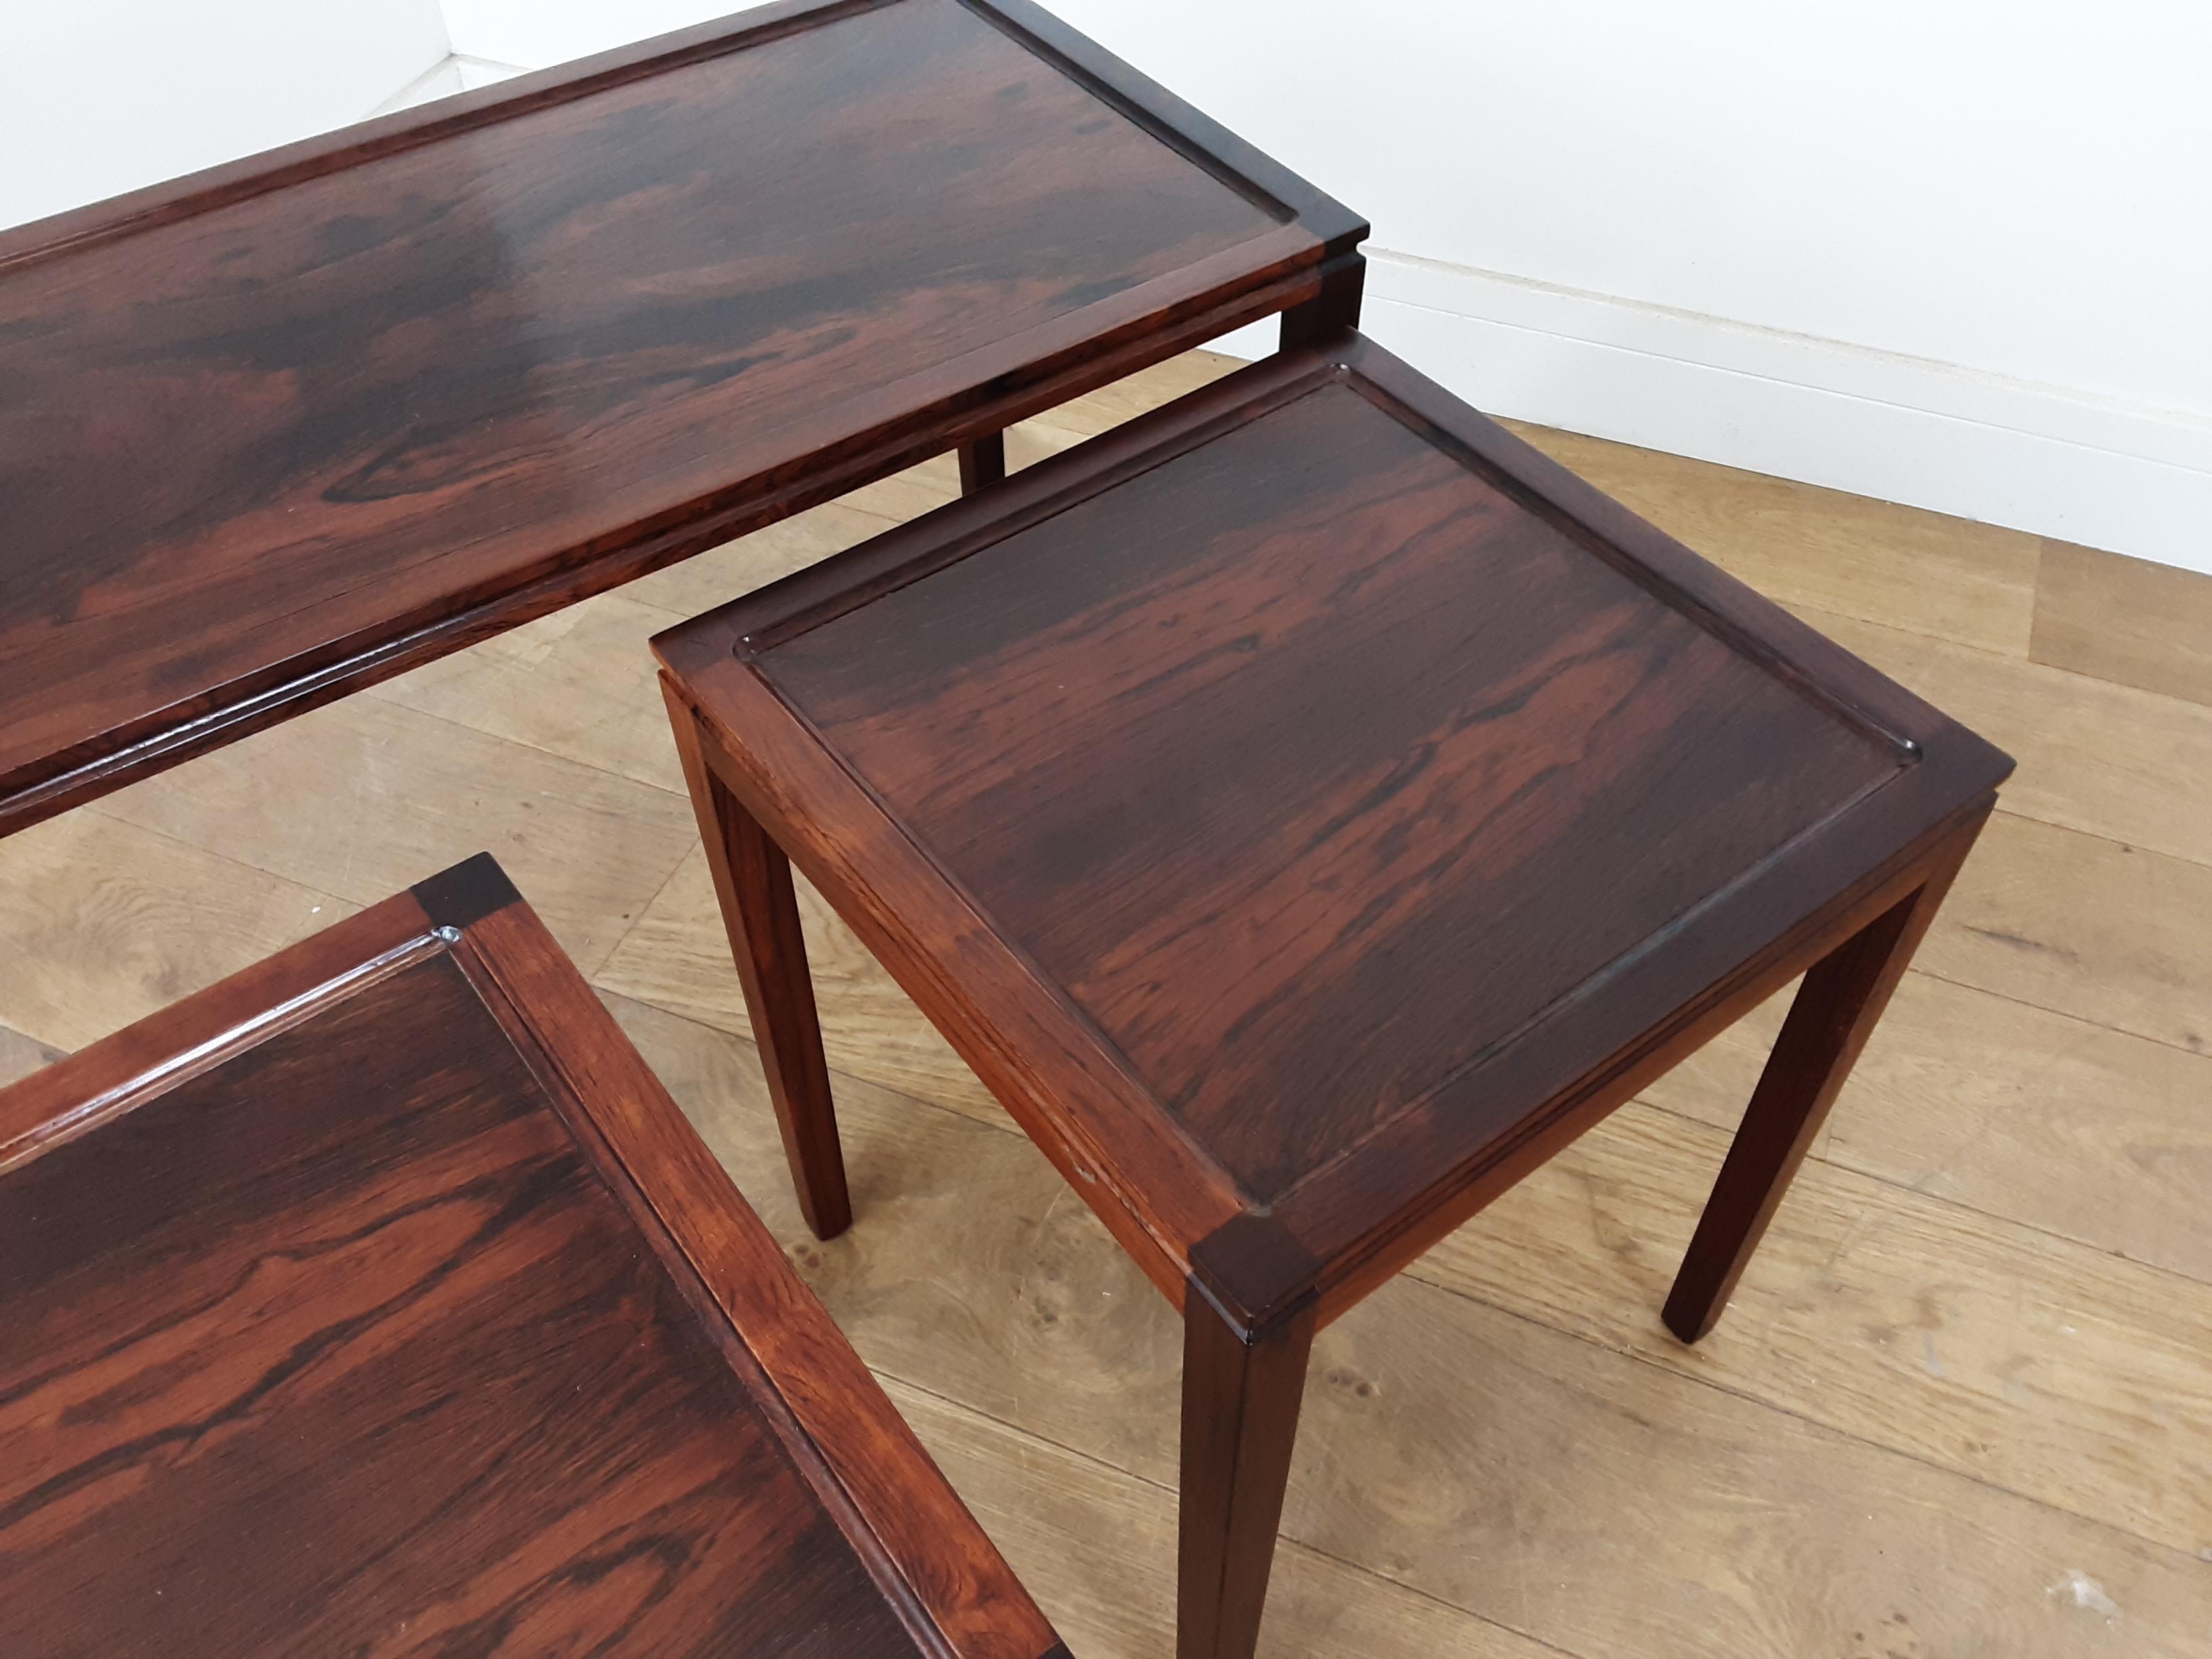 Midcentury Nest of Tables in Deep Brown Figured Rosewood circa 1960 from Denmark For Sale 5